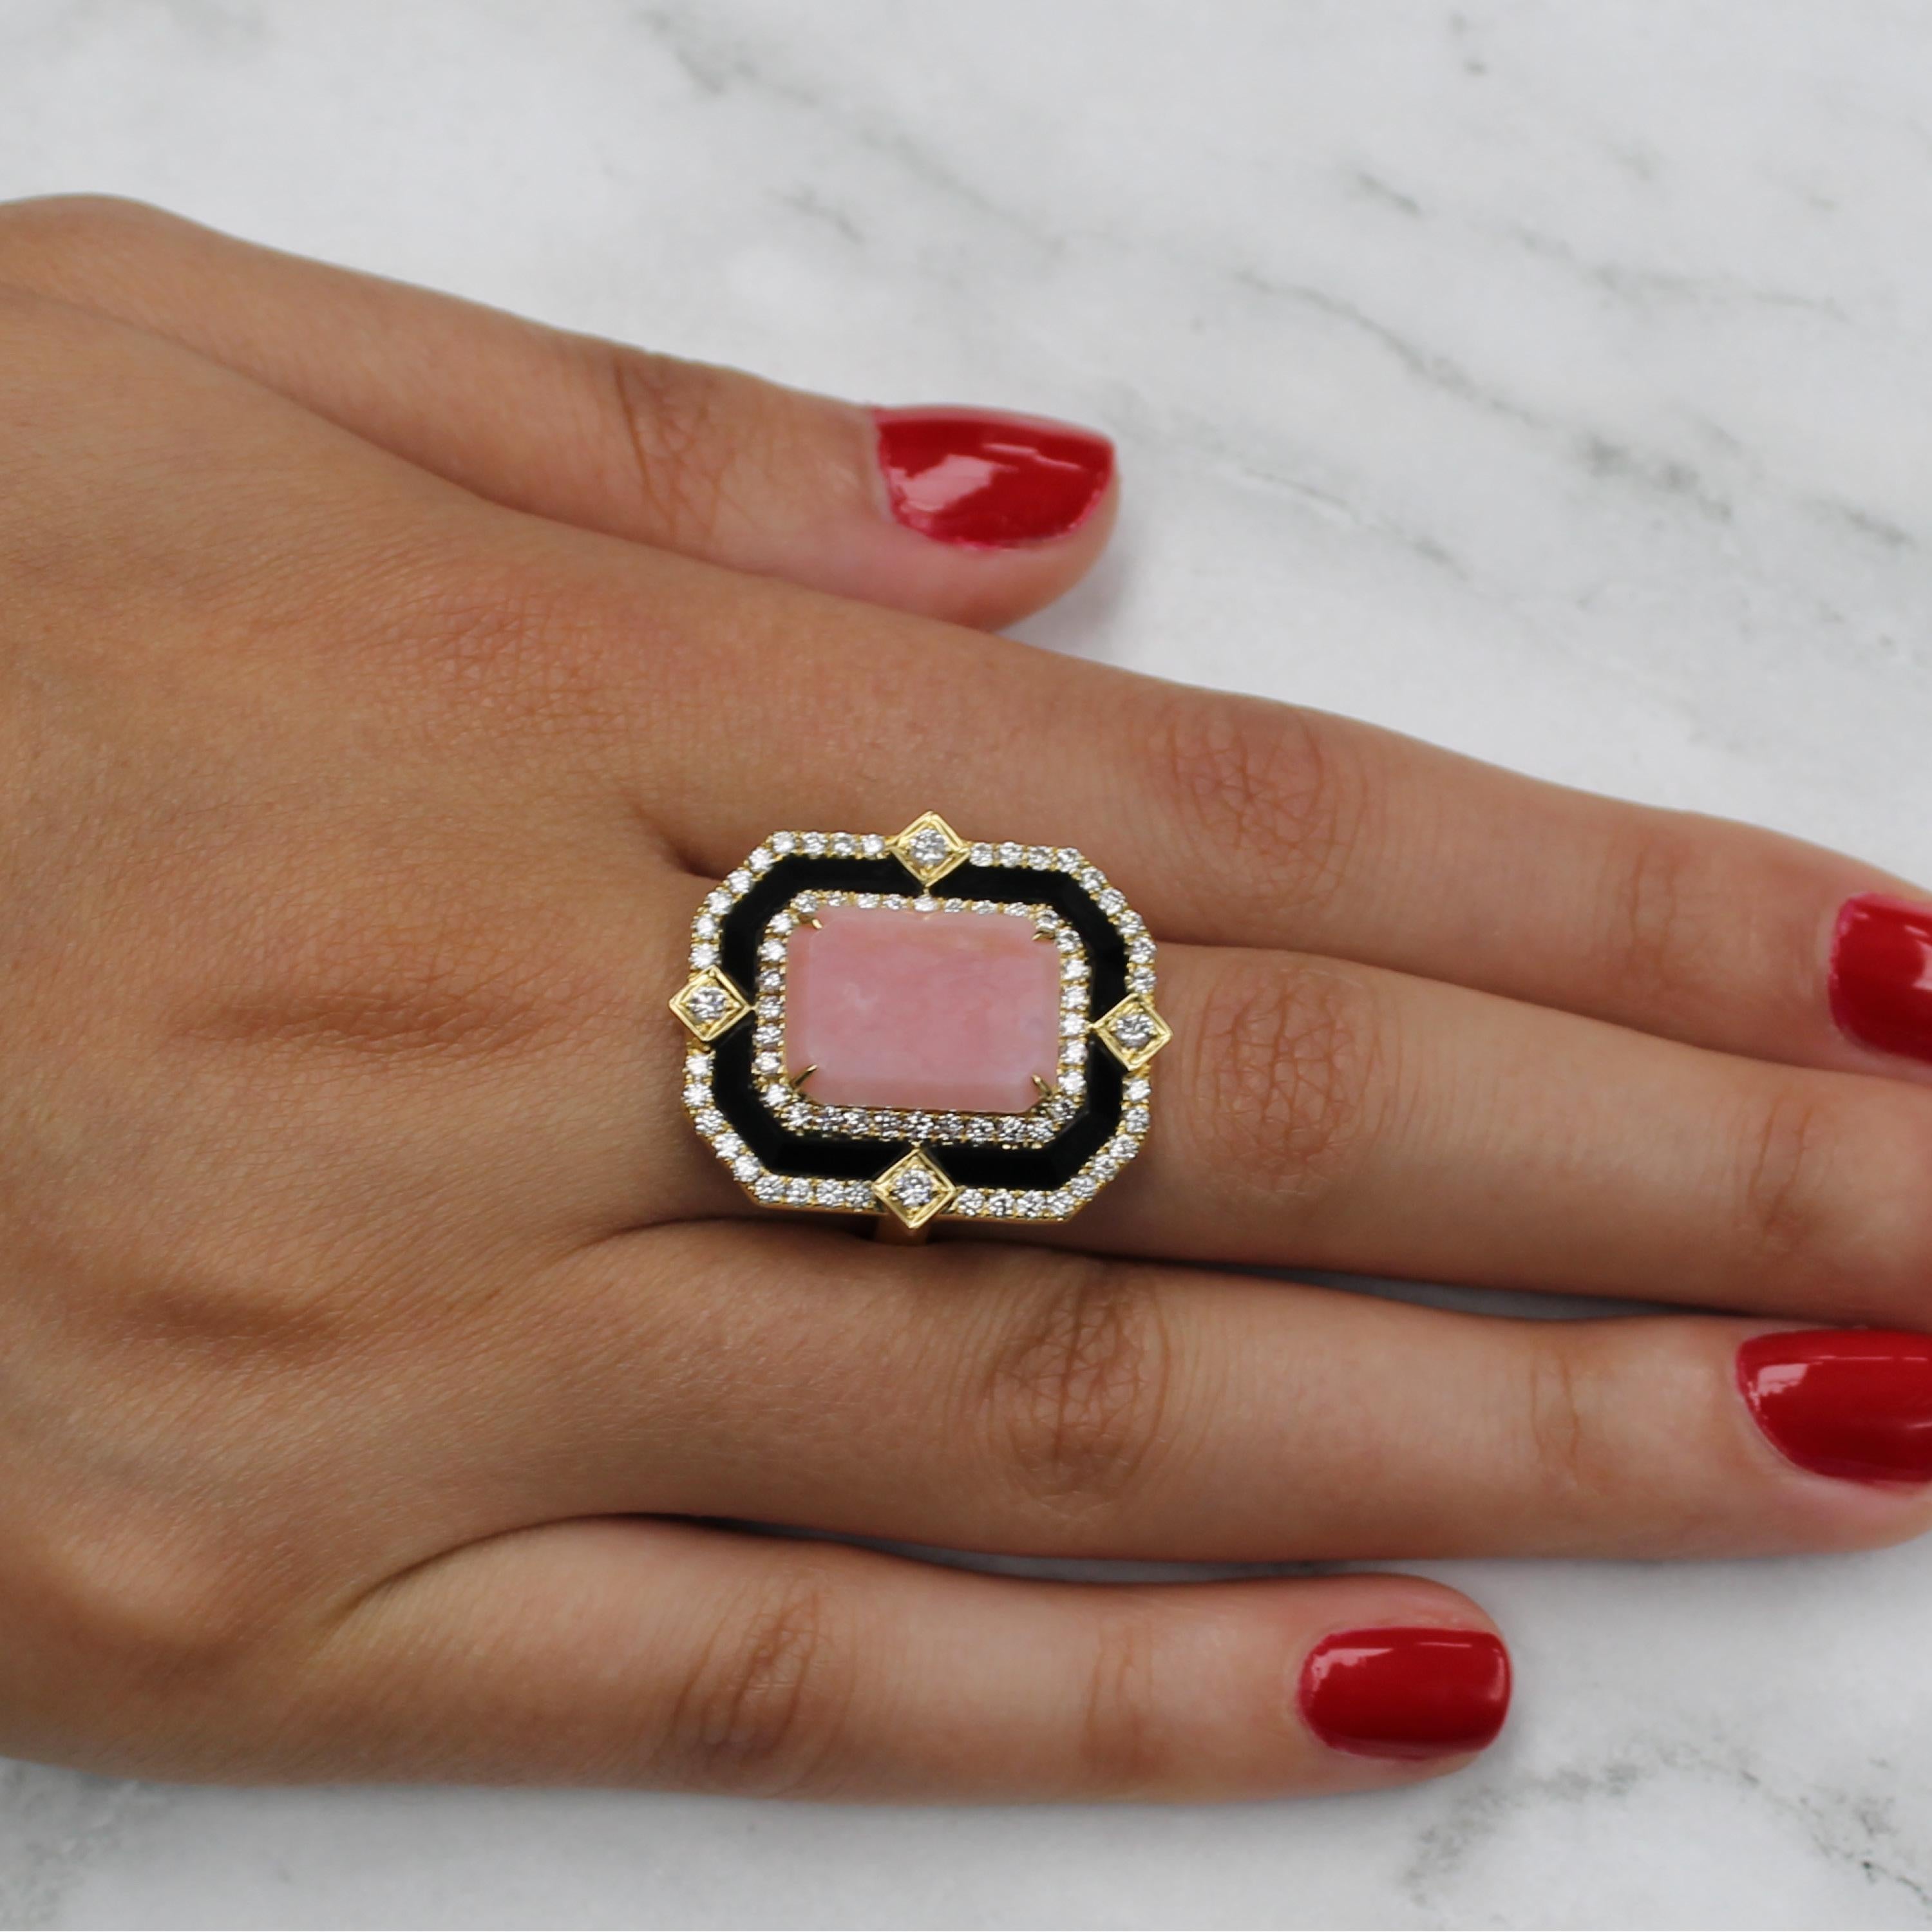 Art-Deco Style Cocktail Ring featuring Emerald-Cut Pink Opal, Black Onyx, and diamond halo, set in 18K yellow gold. Finger size 6.5, adjustable upon request/quote. Pink Opal is a powerful stone, known for healing the emotions, especially those